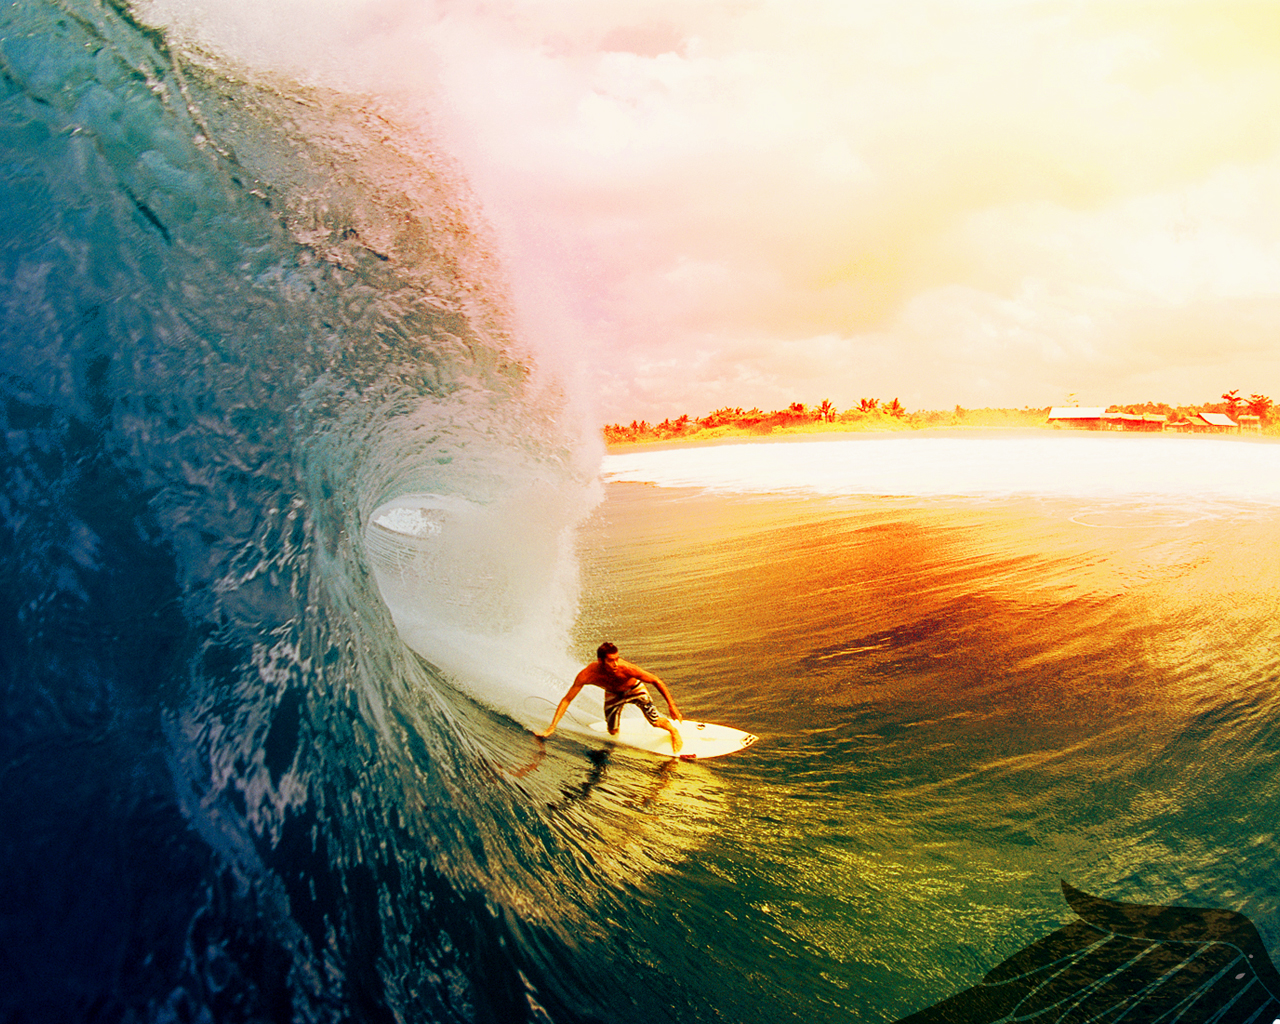 Cool Surfing Wallpaper Surf Pictures And Videos